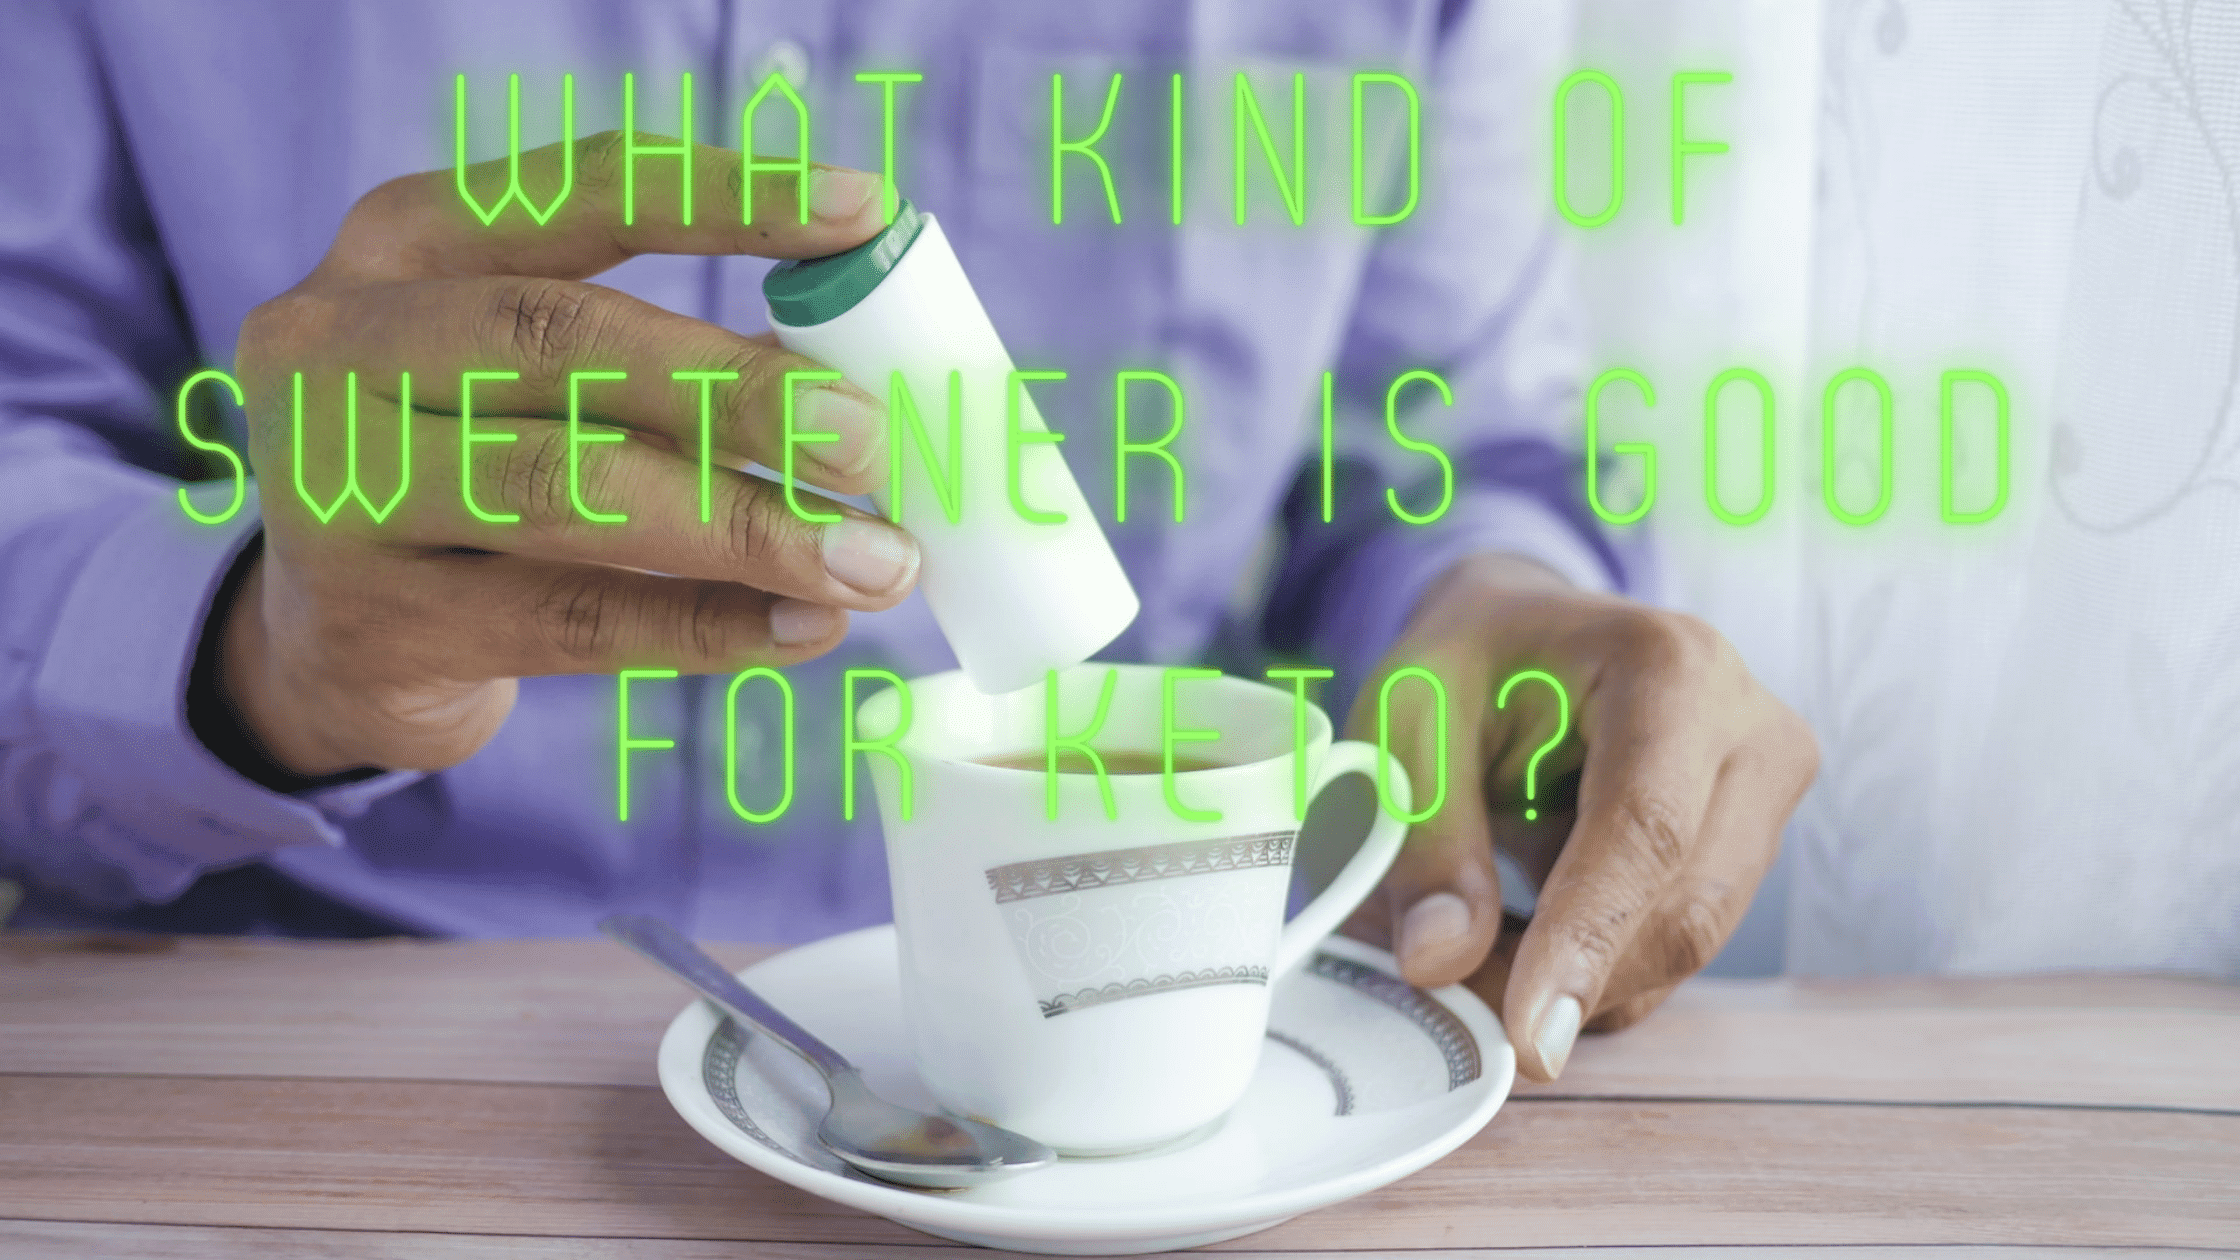 What kind of sweetener is good for keto